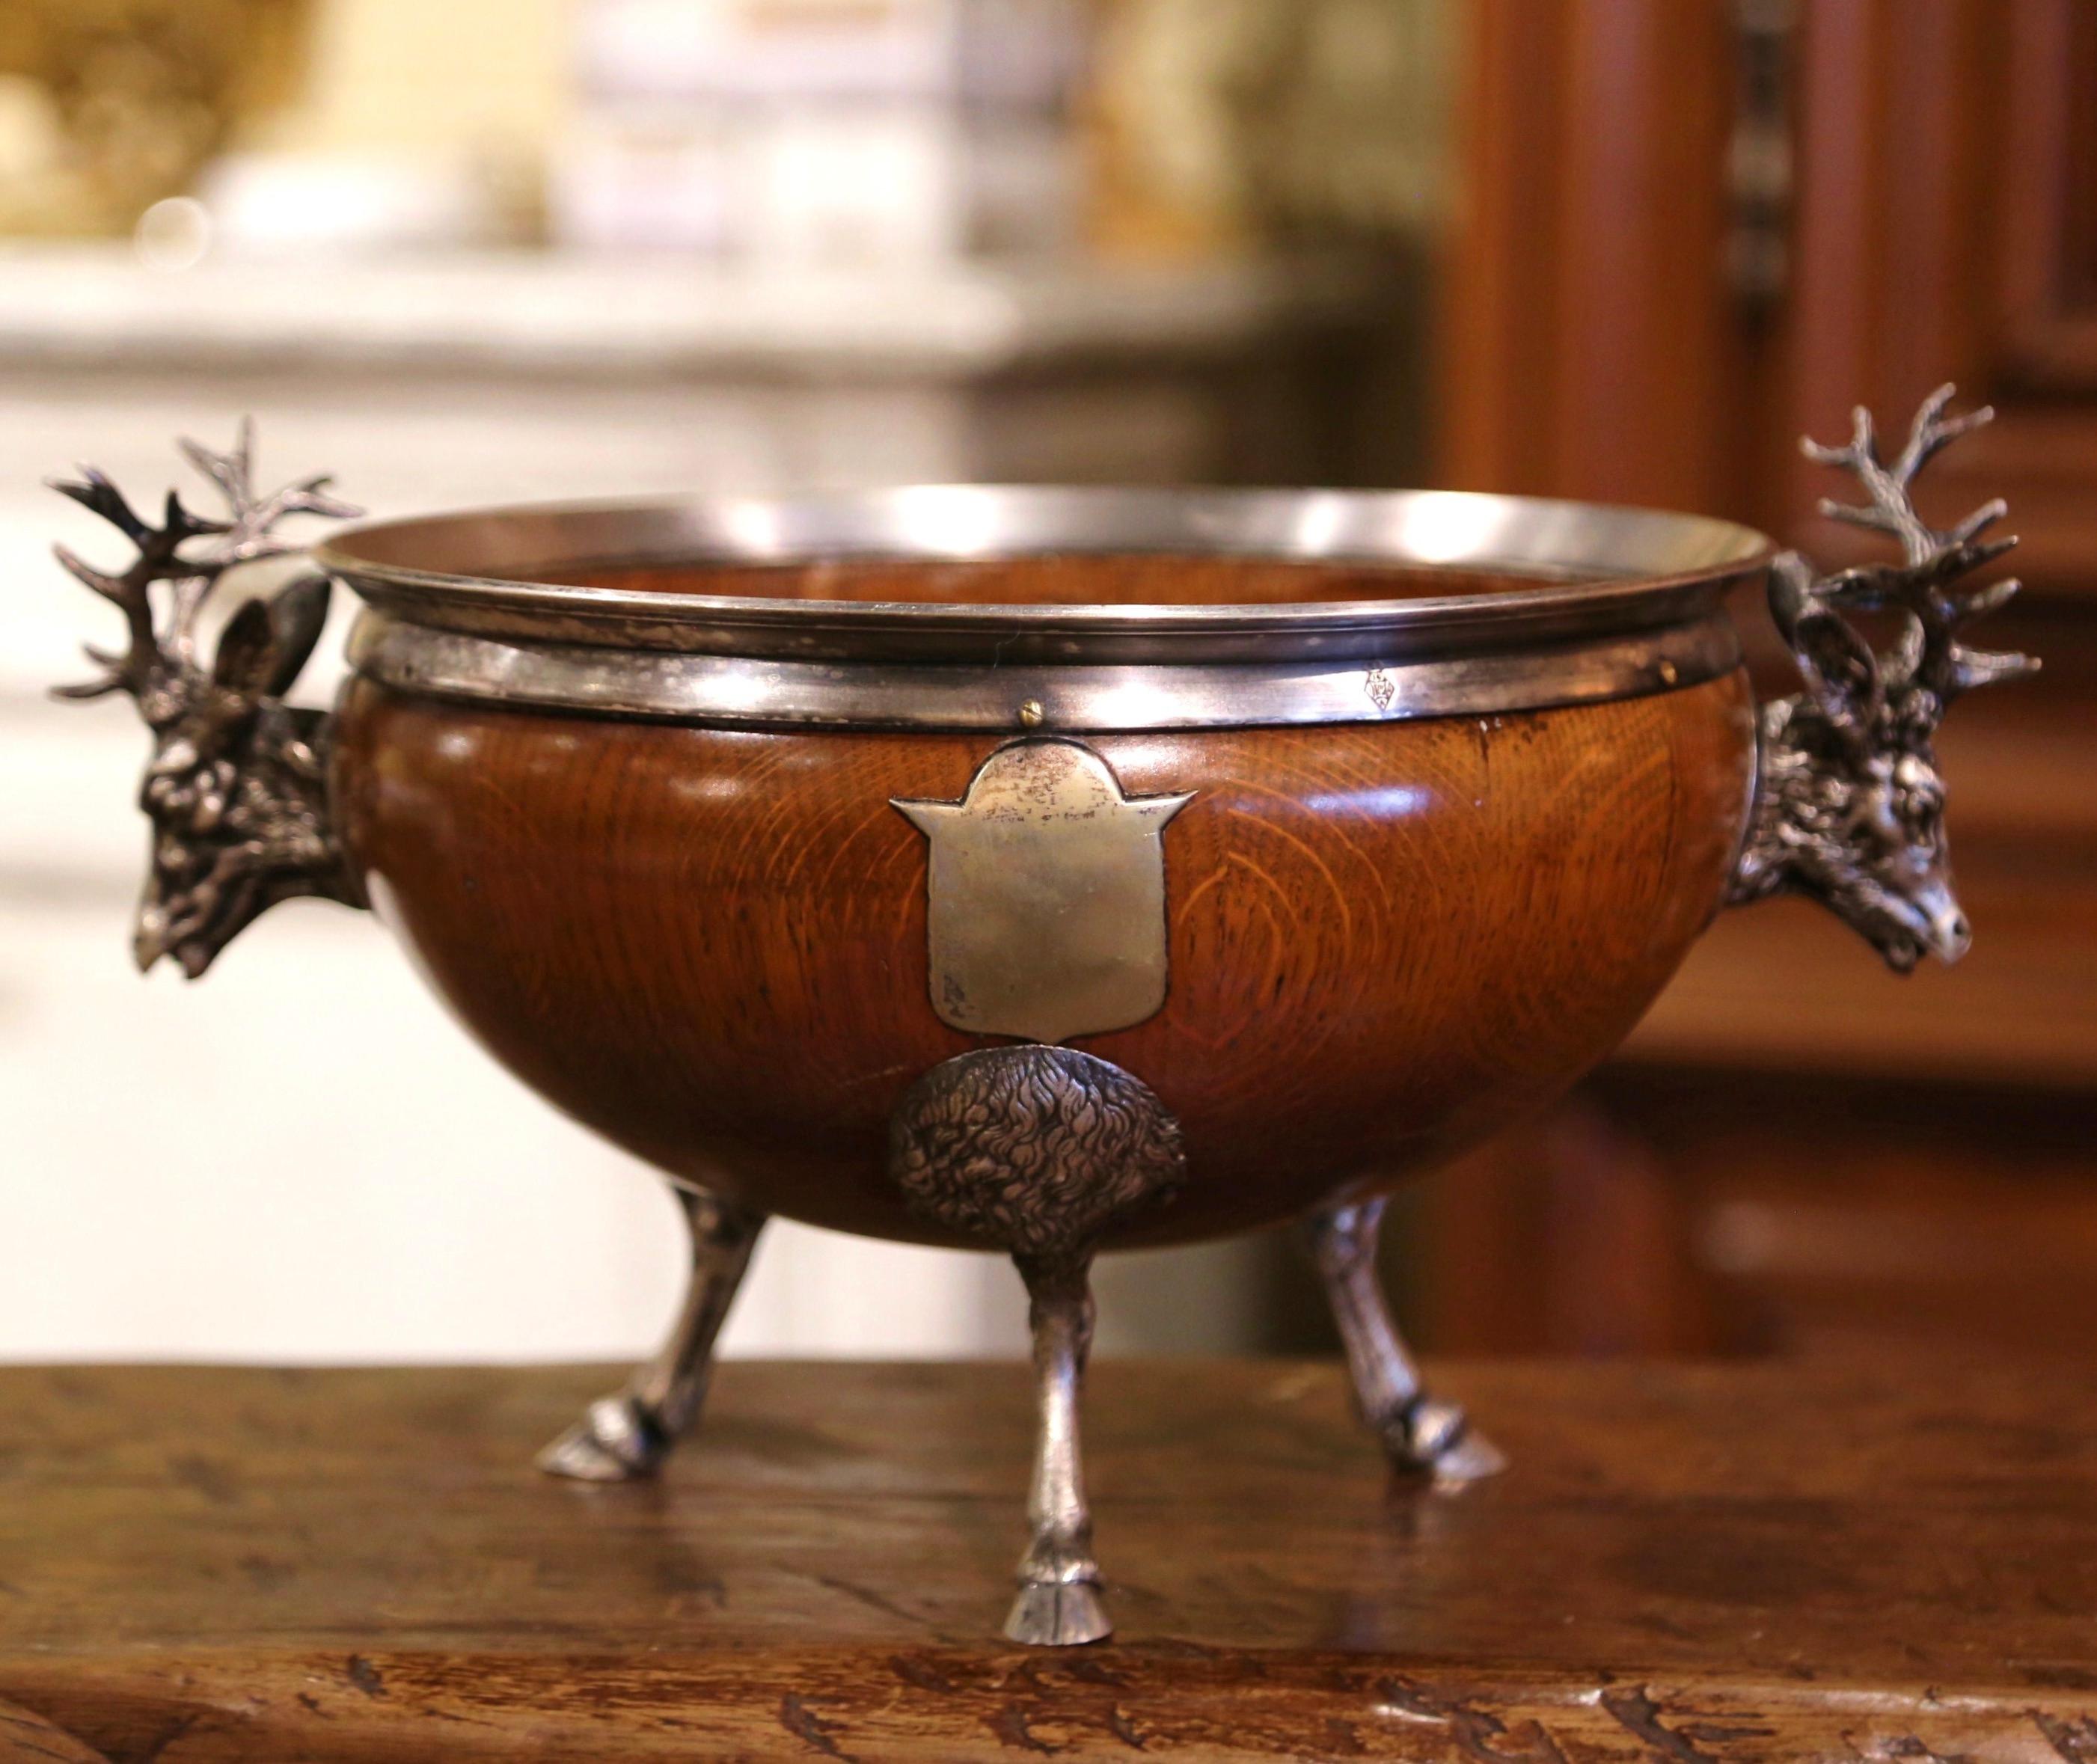 Oak 19th Century English Wooden and Silver Plated Bowl on Hoof Feet with Deer Motifs